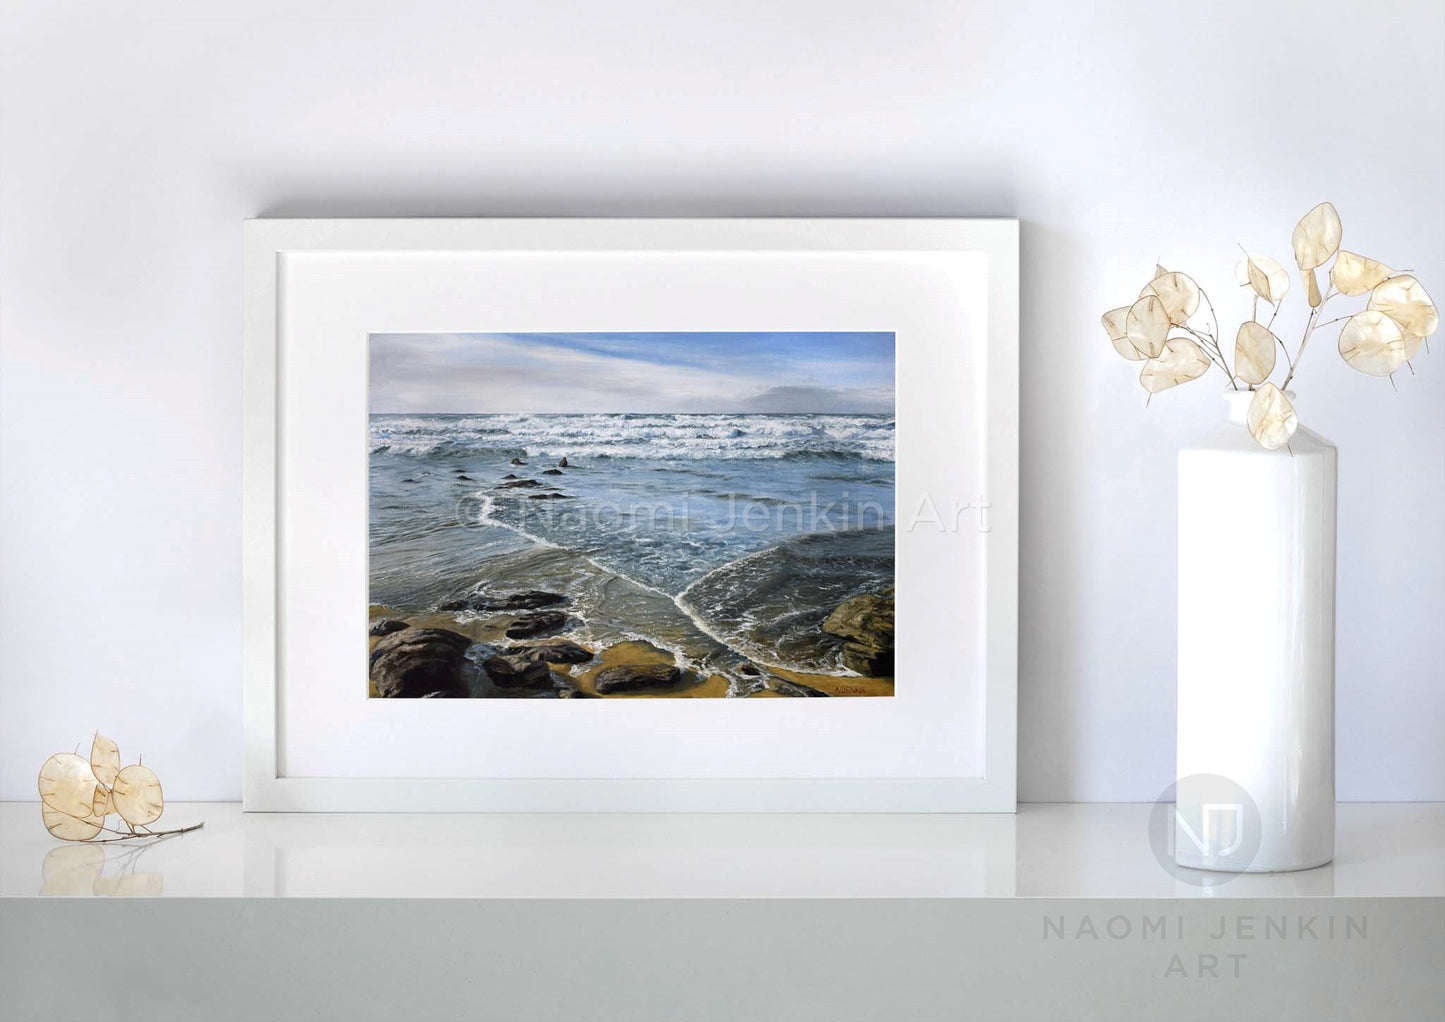 Watergate Bay print titled 'Incoming Tide' by artist Naomi Jenkin Art in a white frame